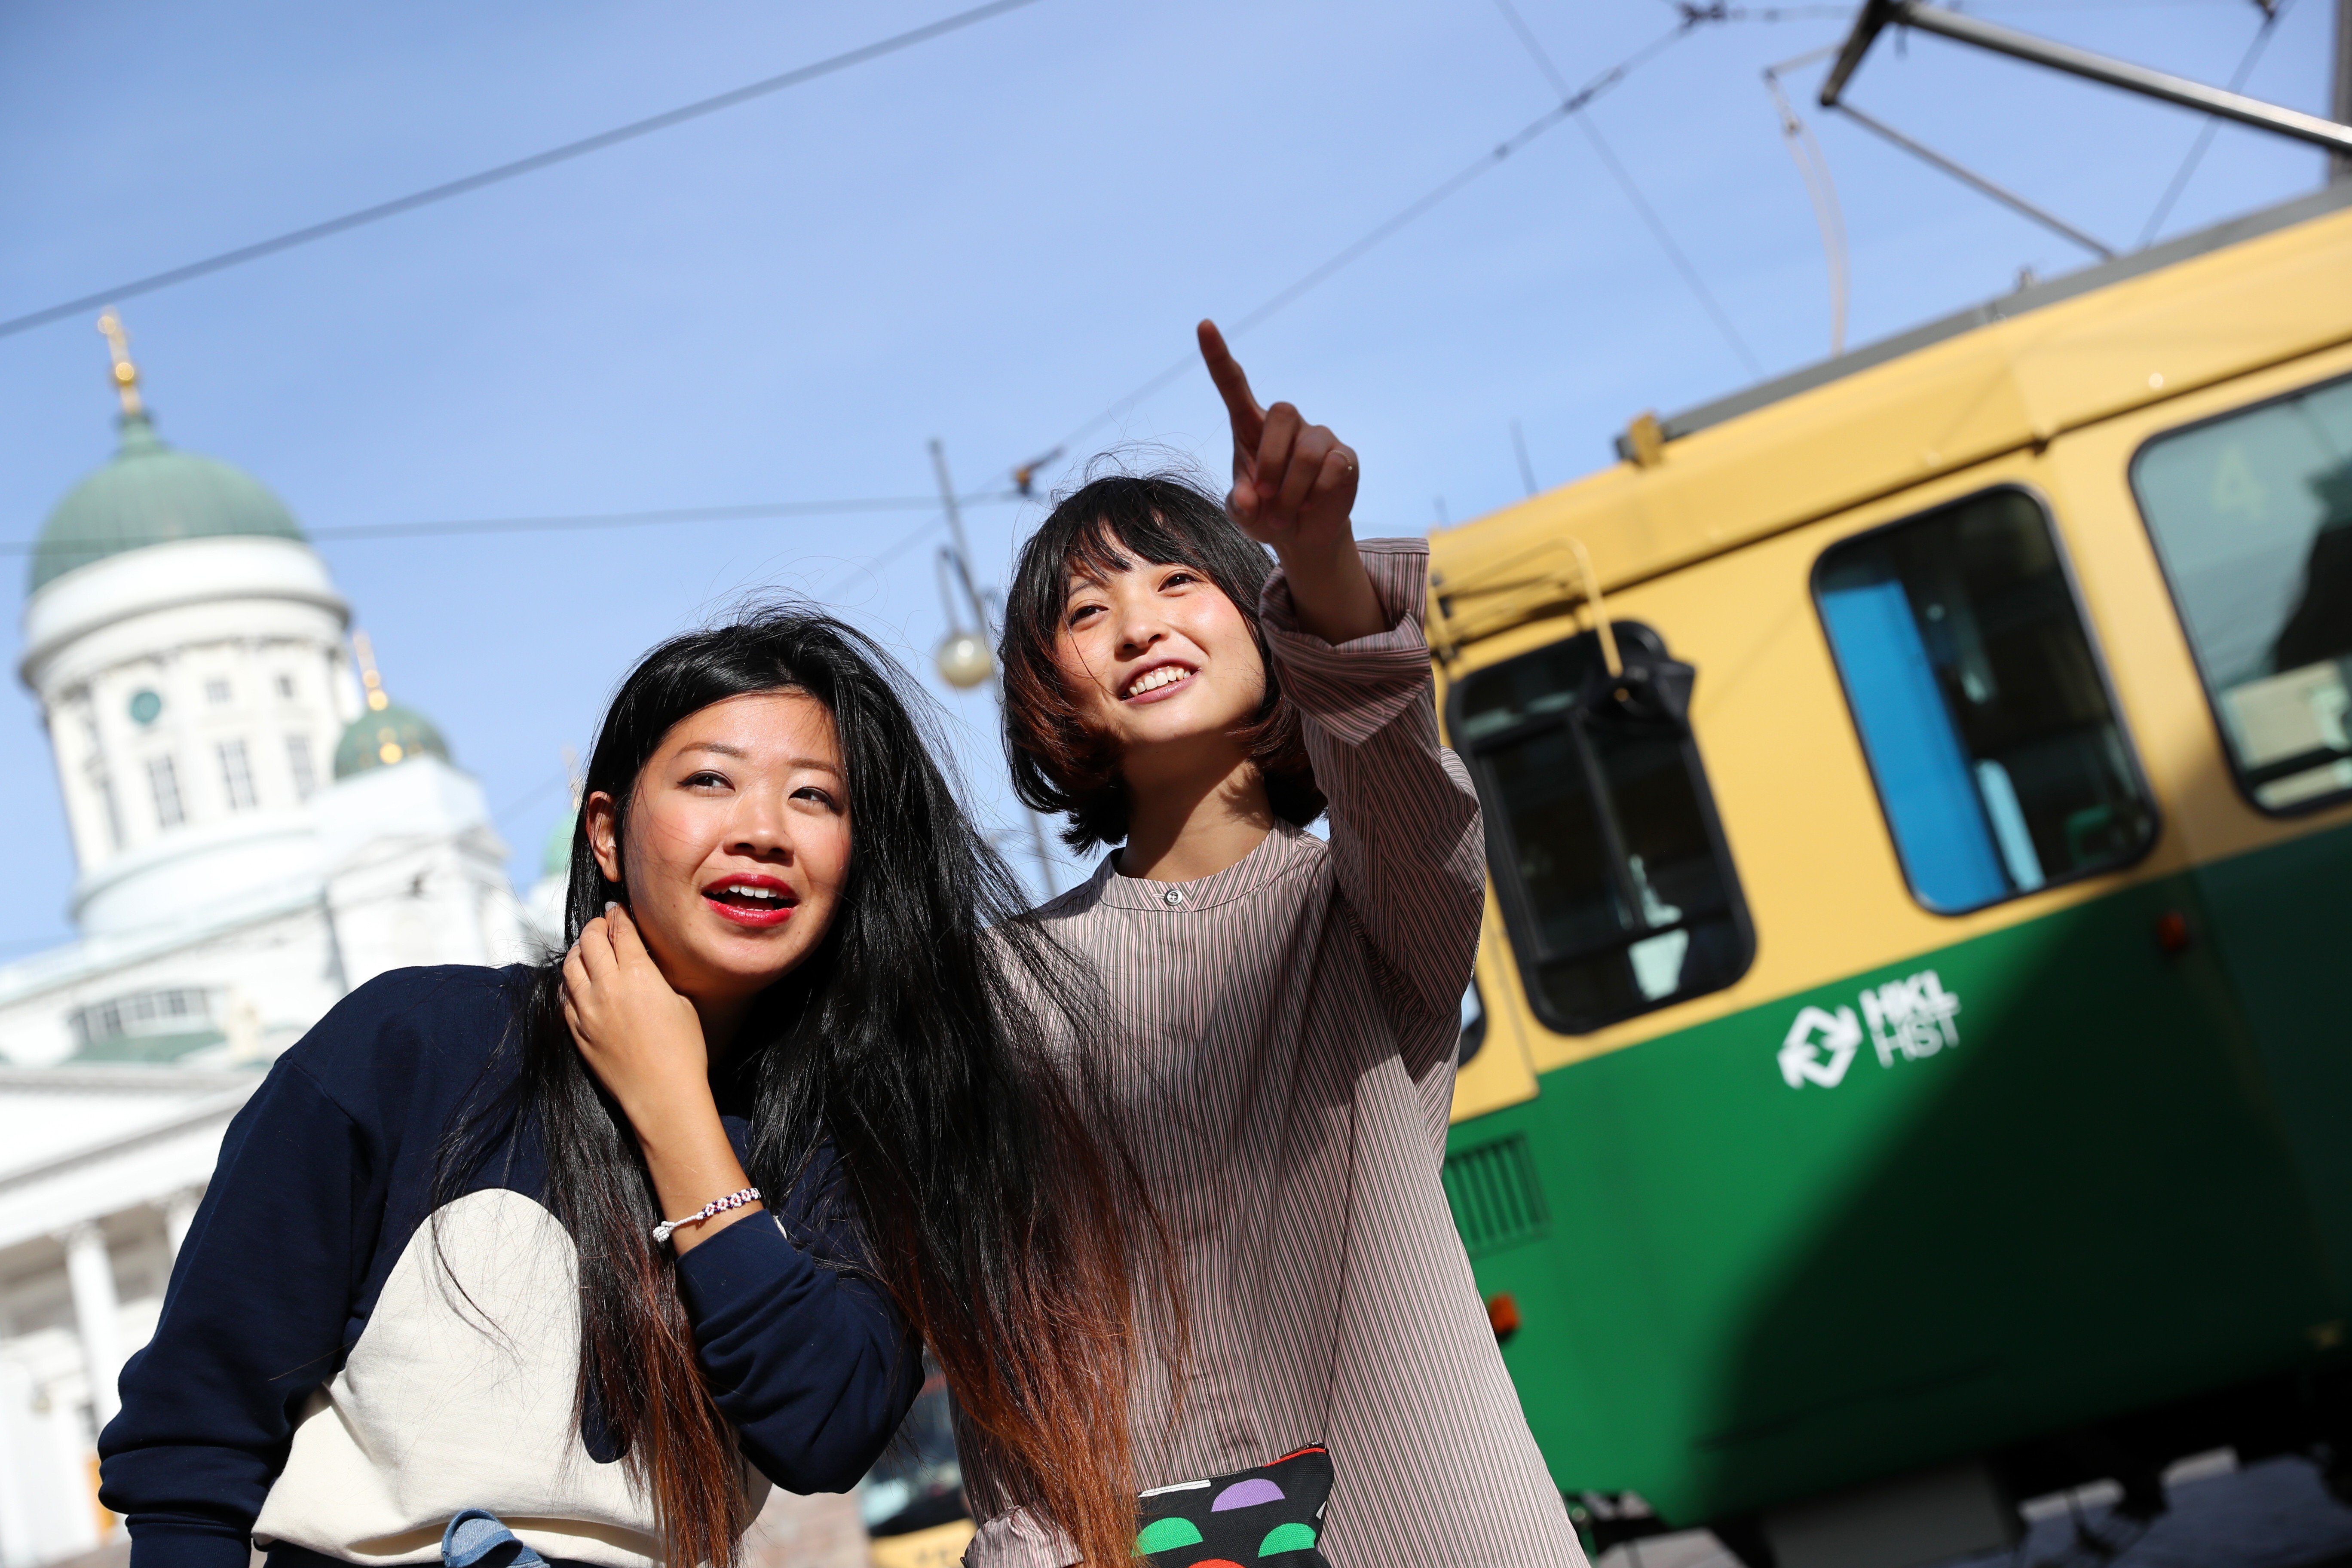 Helsinki tourism is hoping to encourage more Chinese tourists to come to Finland with the introduction of a digital tourism program on WeChat.